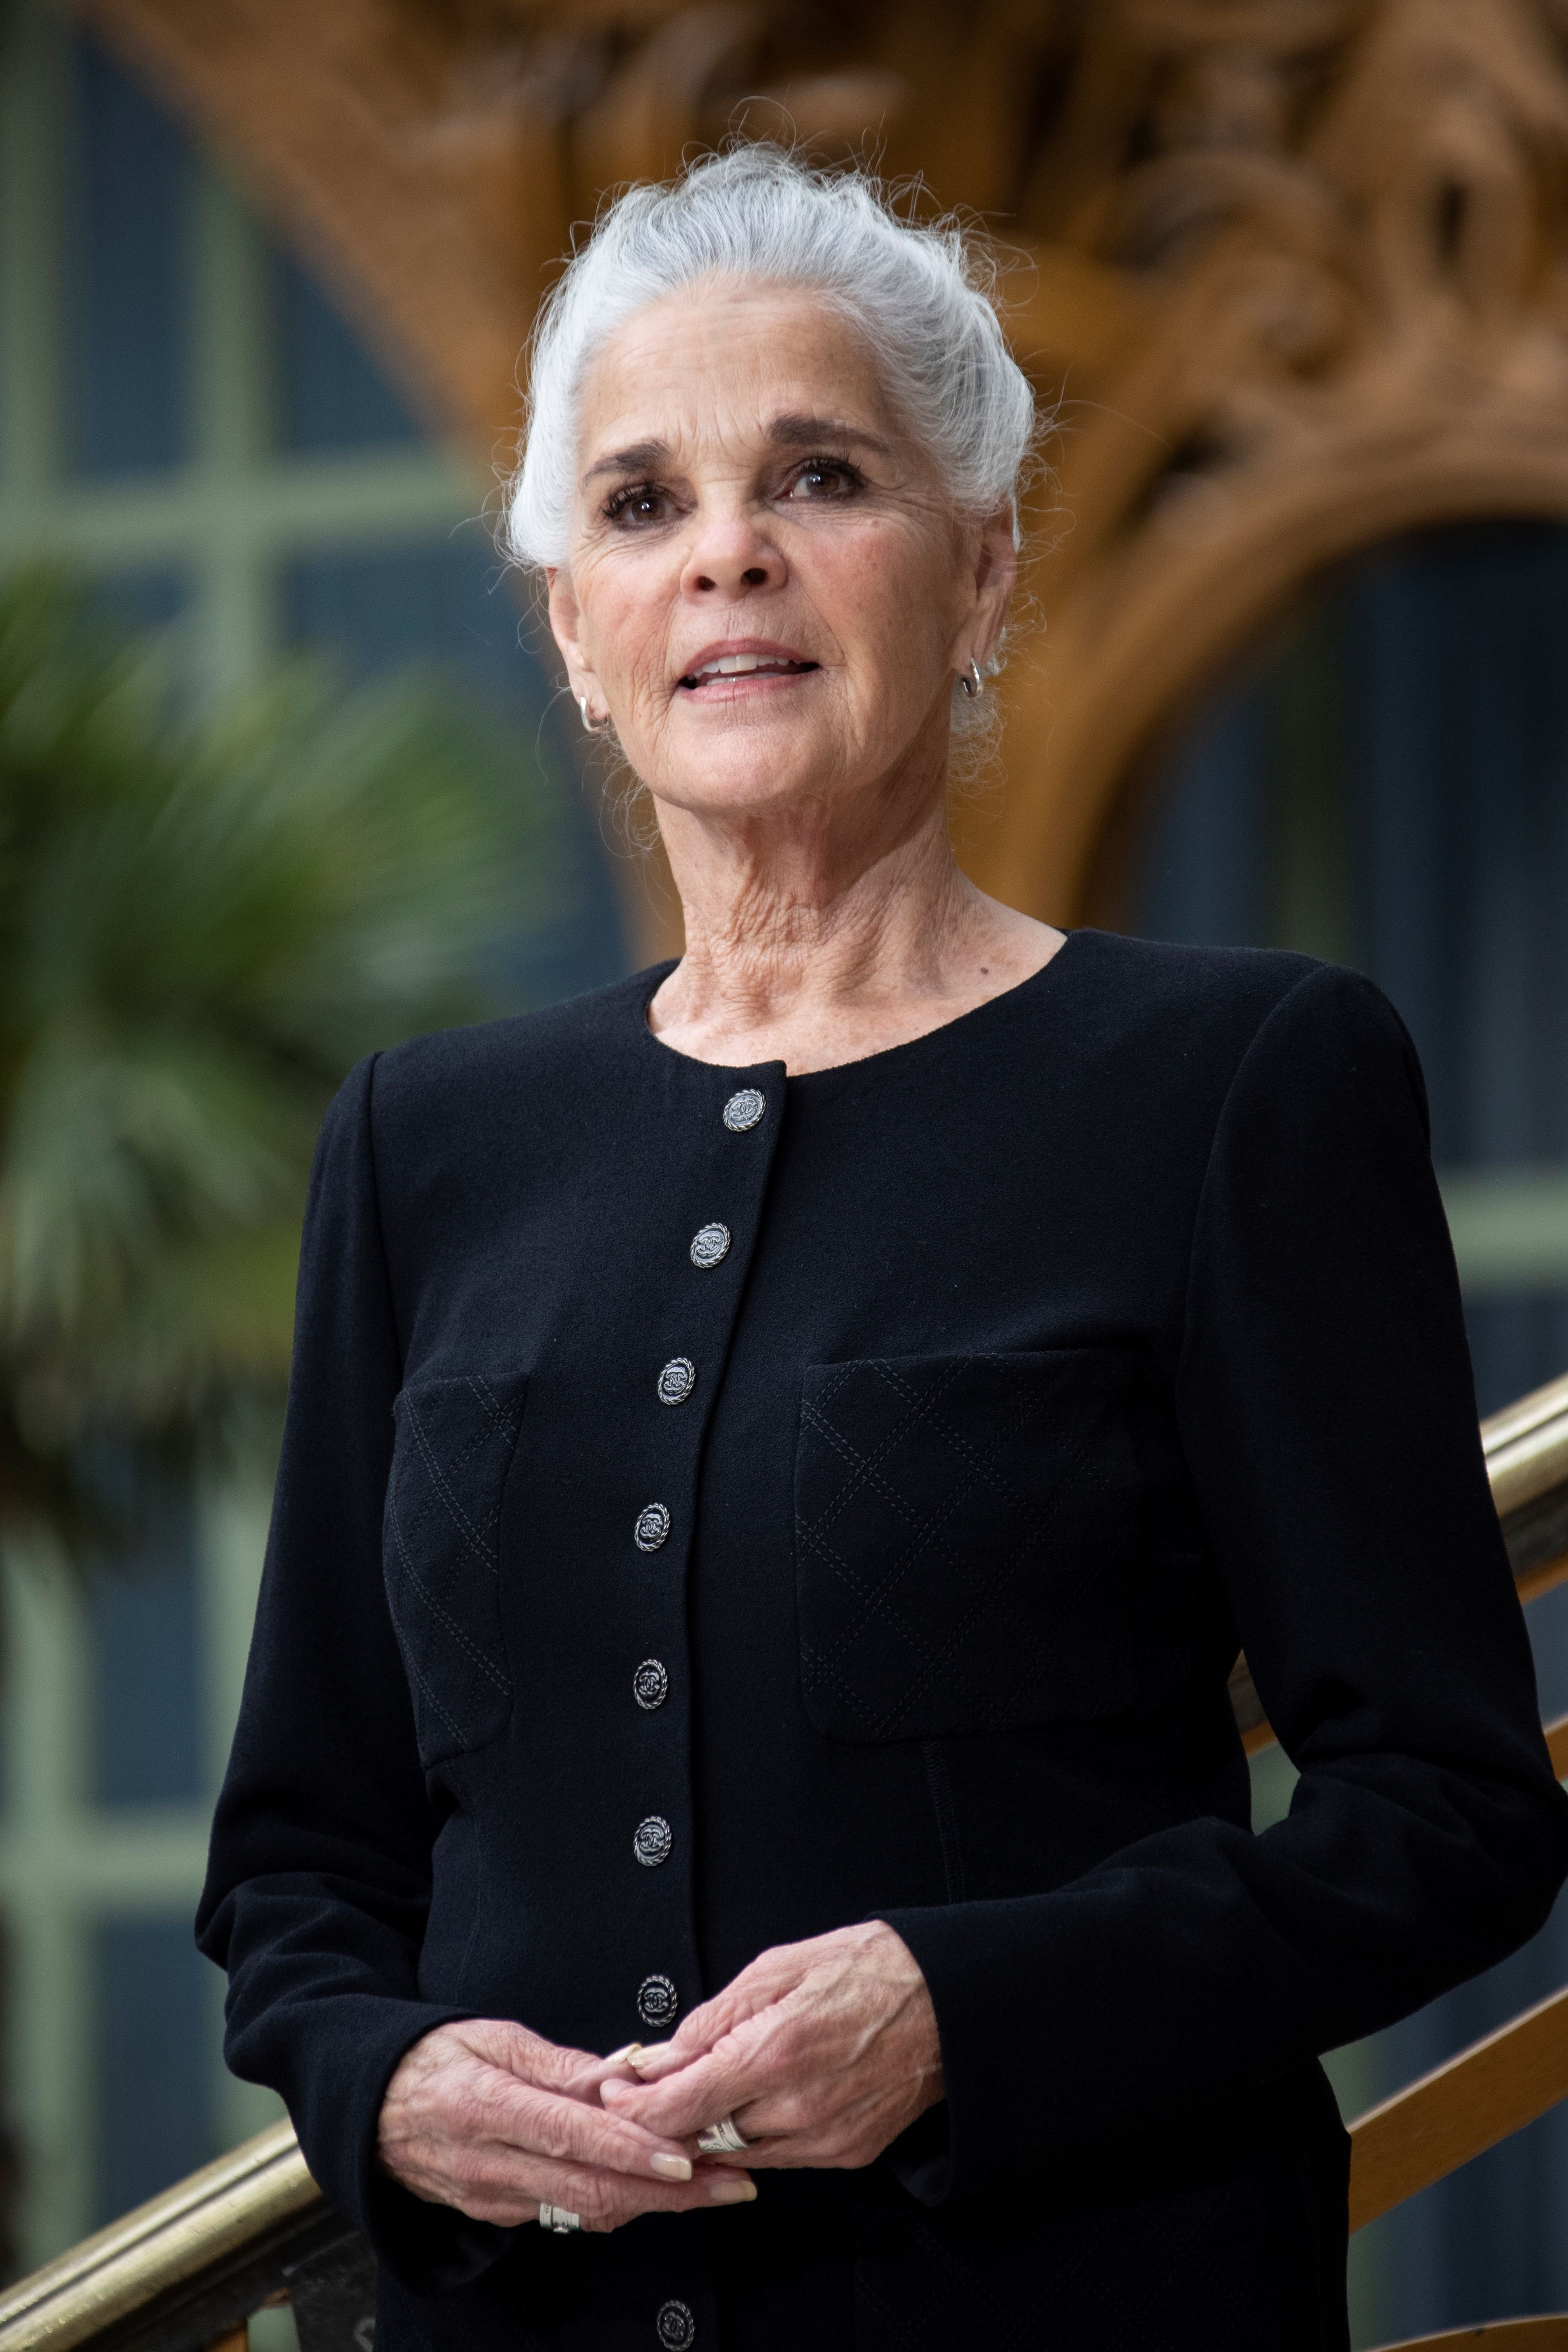 Ali MacGraw poses during the photocall prior to the 2020 Chanel Croisiere fashion show at the Grand Palais on May 3, 2019, in Paris, France. | Source: Getty Images